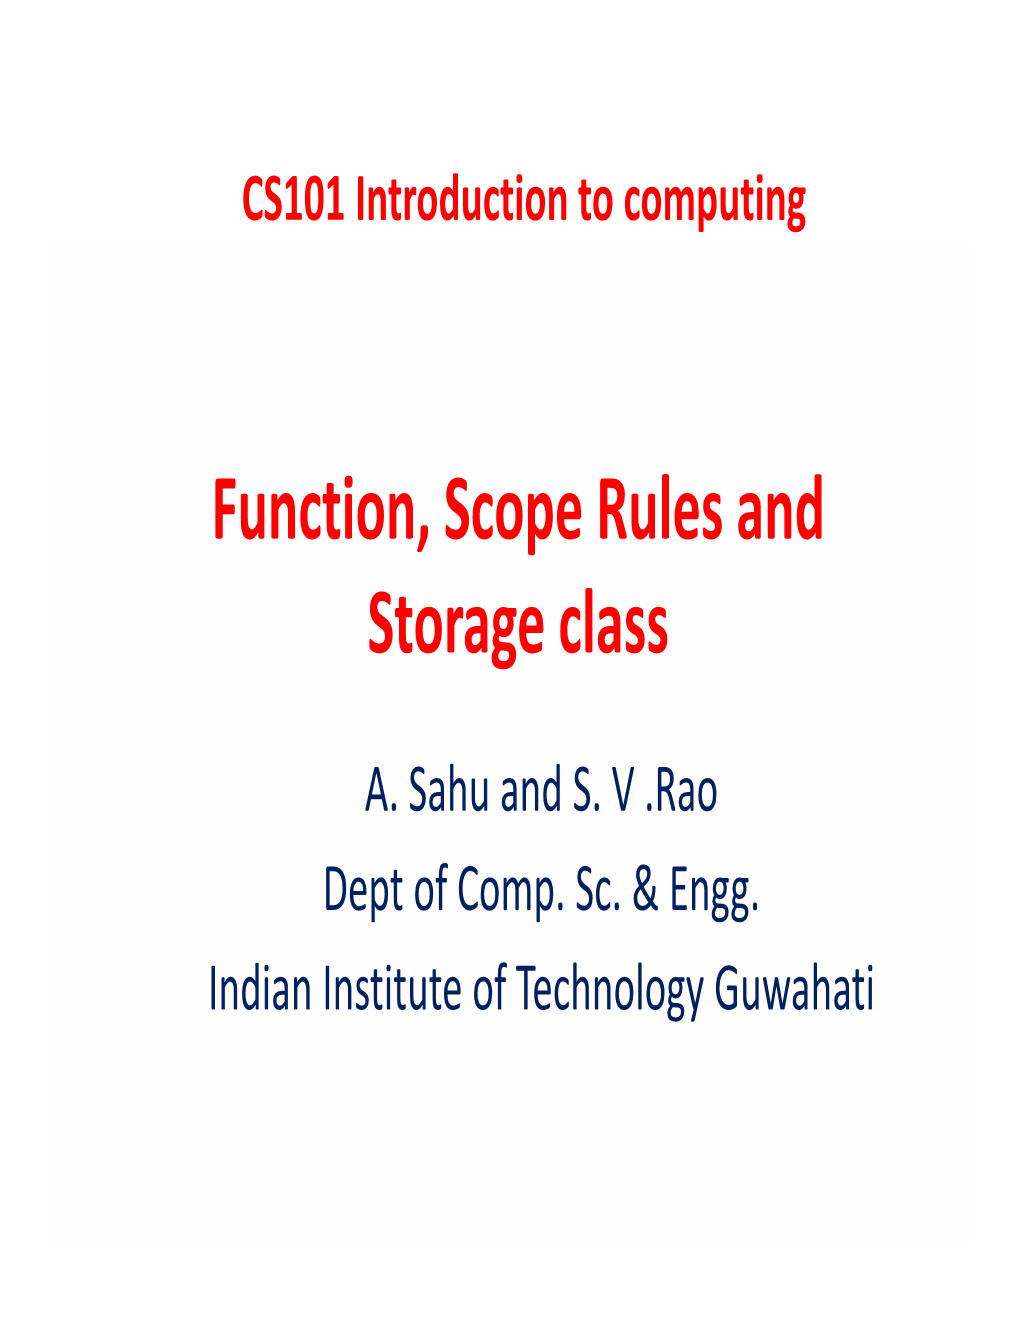 Function, Scope Rules and Storage Class